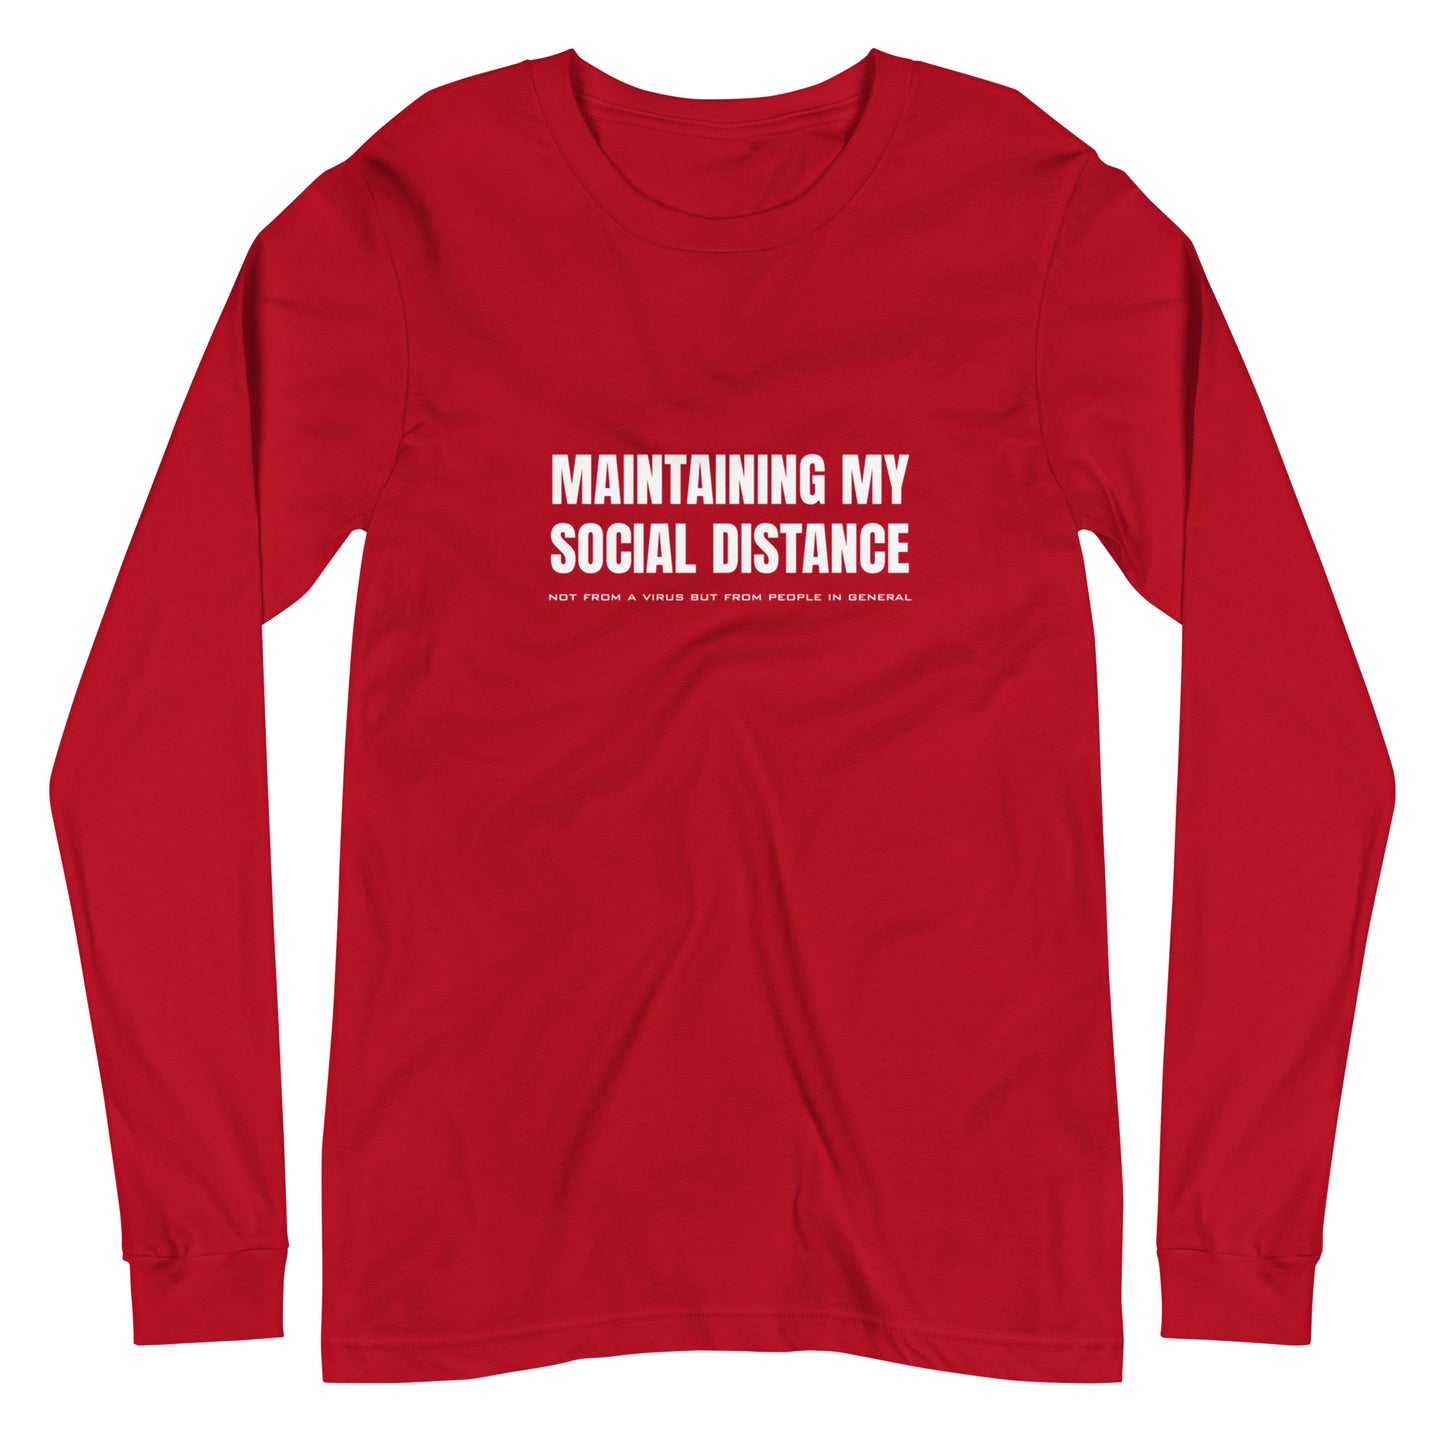 Red long sleeve t-shirt with white graphic: "MAINTAINING MY SOCIAL DISTANCE not from a virus but from people in general"